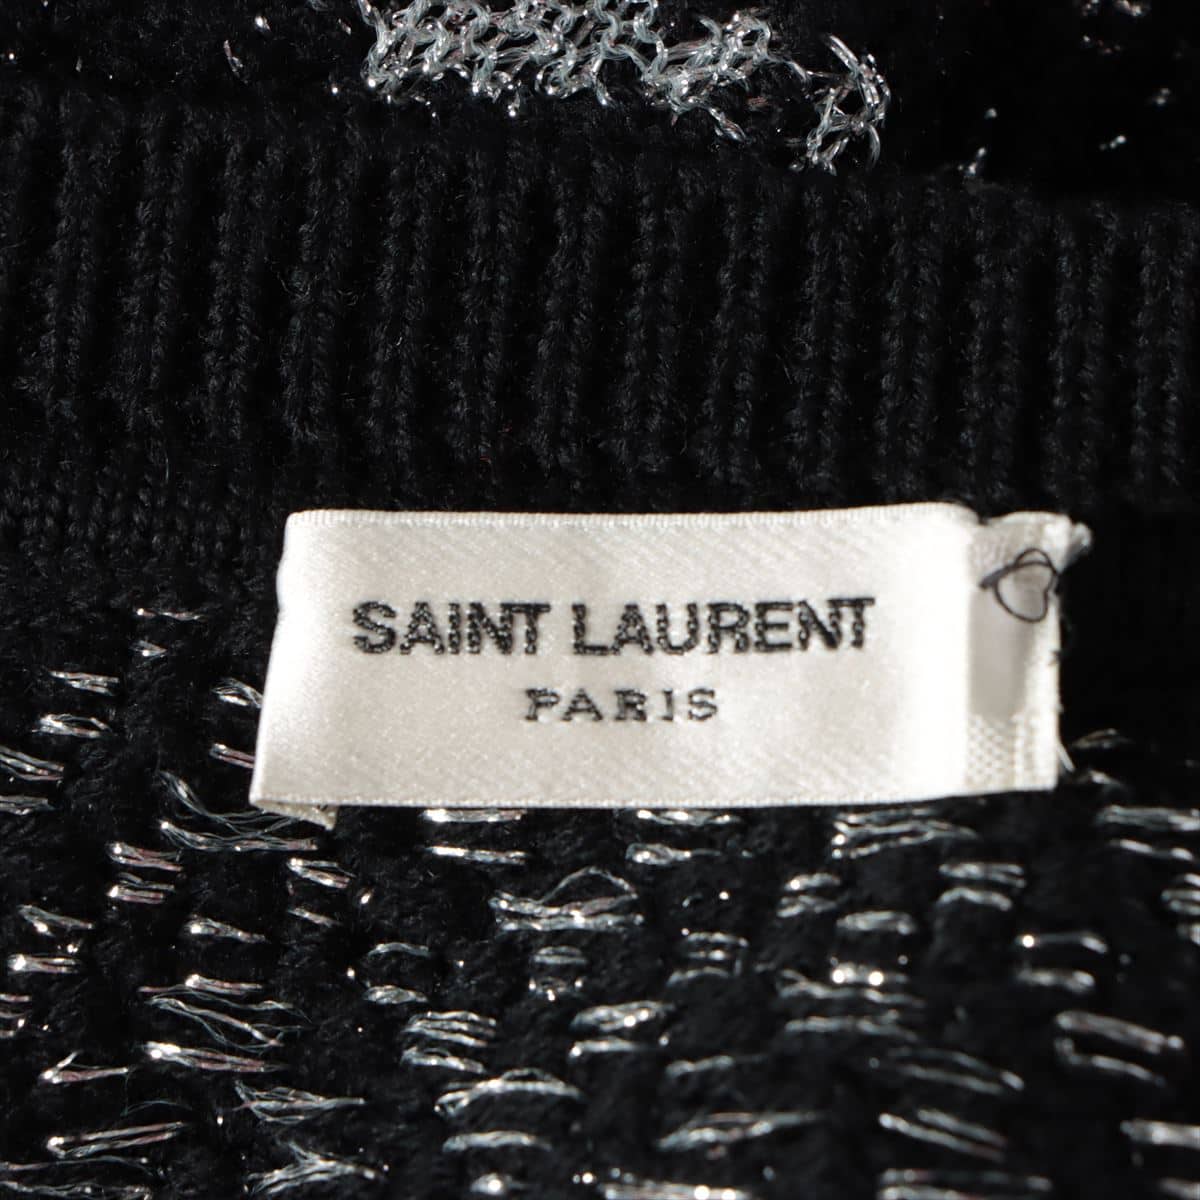 Saint Laurent Paris 18AW Wool Sweater XS Men's Black x Gray  Glitter Tag frayed on one side